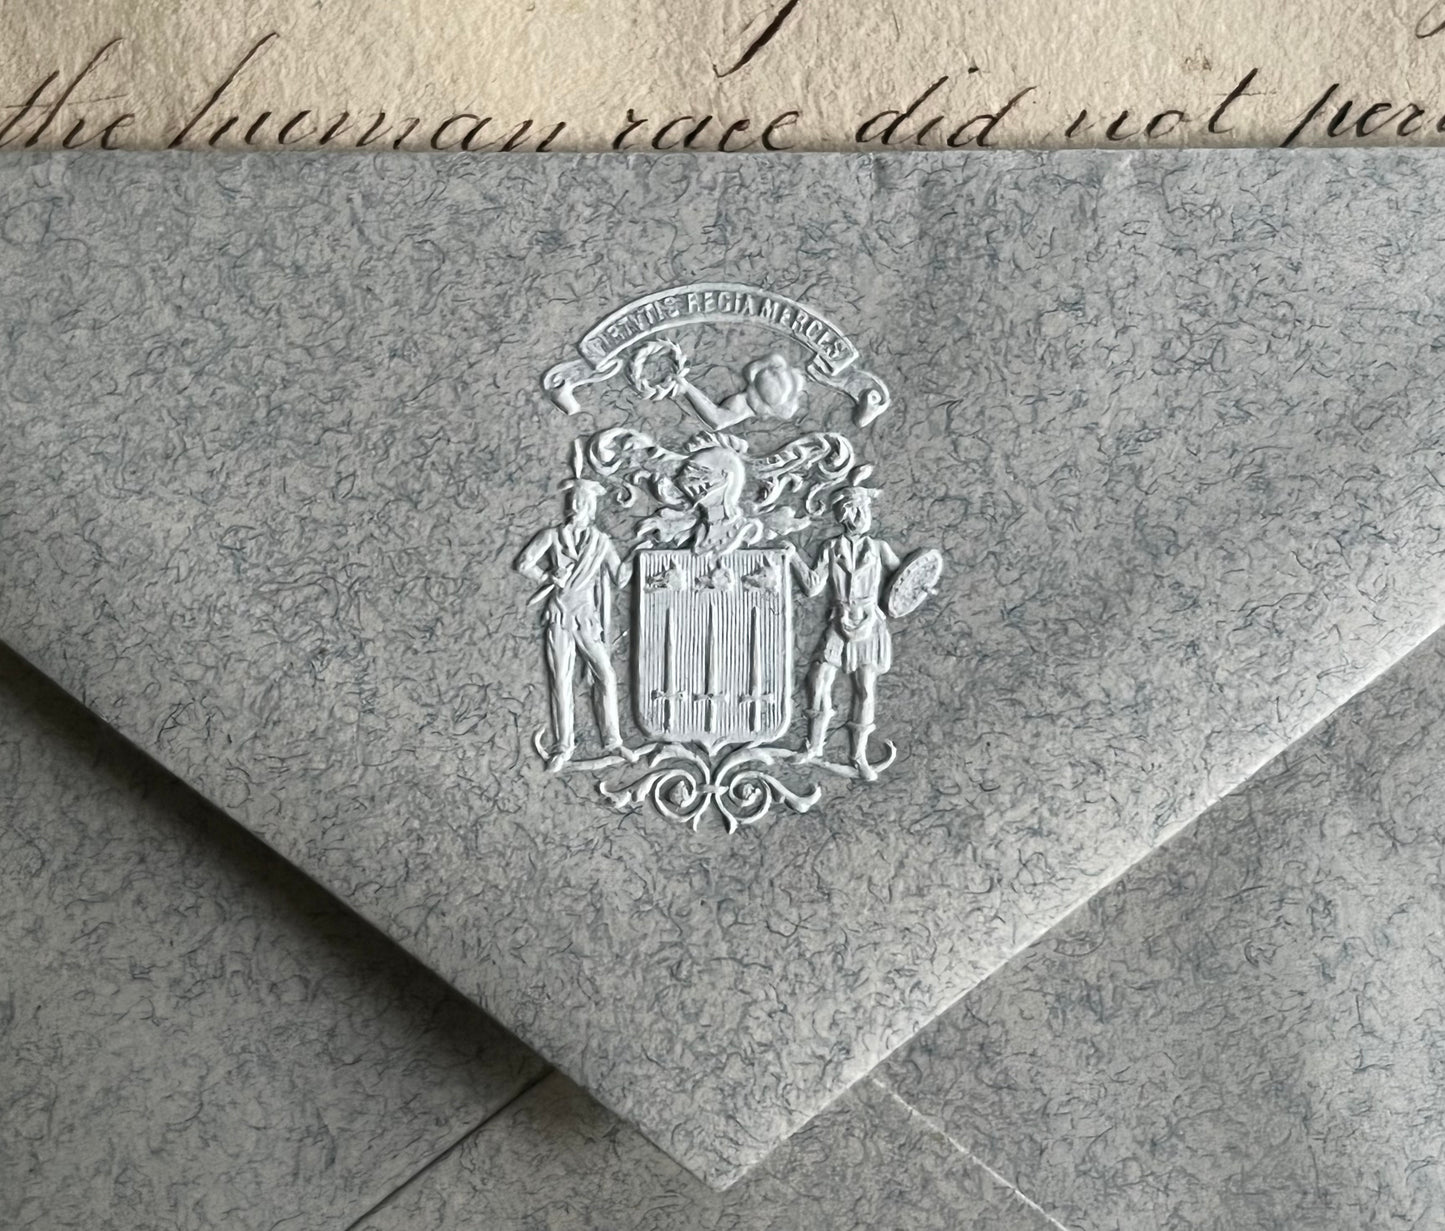 Theyer & Hardtmuth Envelope with Embossed Crest Armory c. 1860s